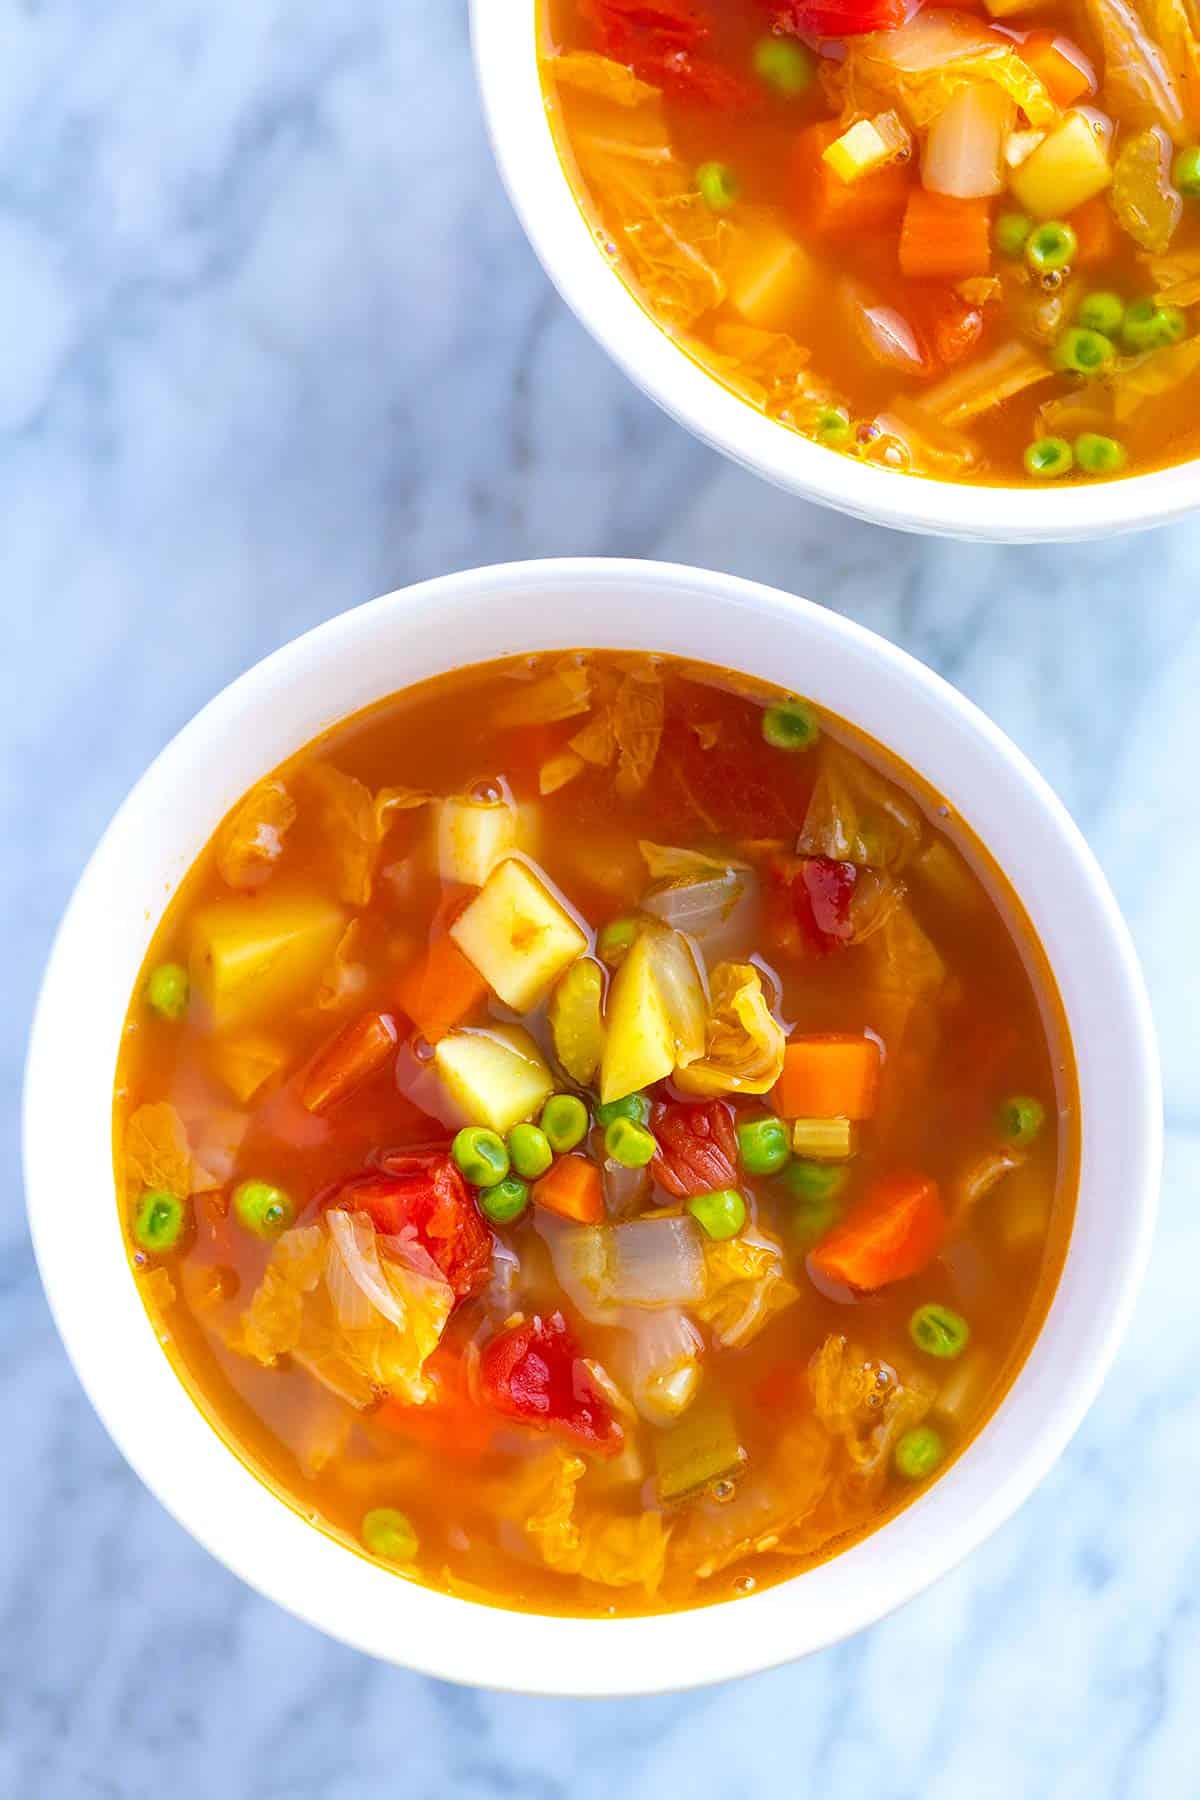 Vegetable Soup with potatoes, cabbage, carrots, and peas